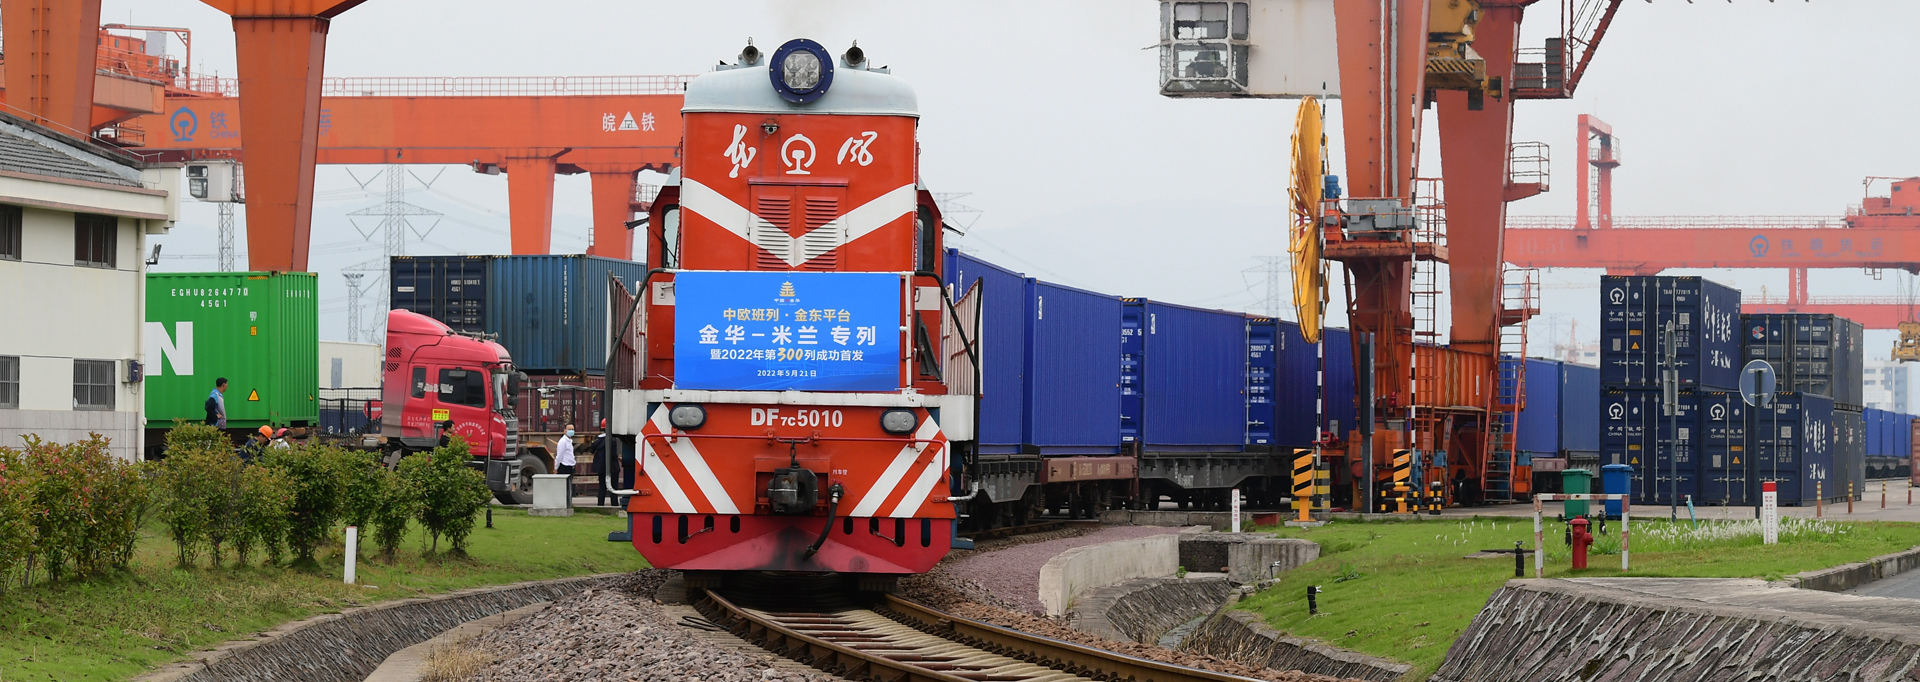 China-Europe freight trains operate steadily in Jinhua